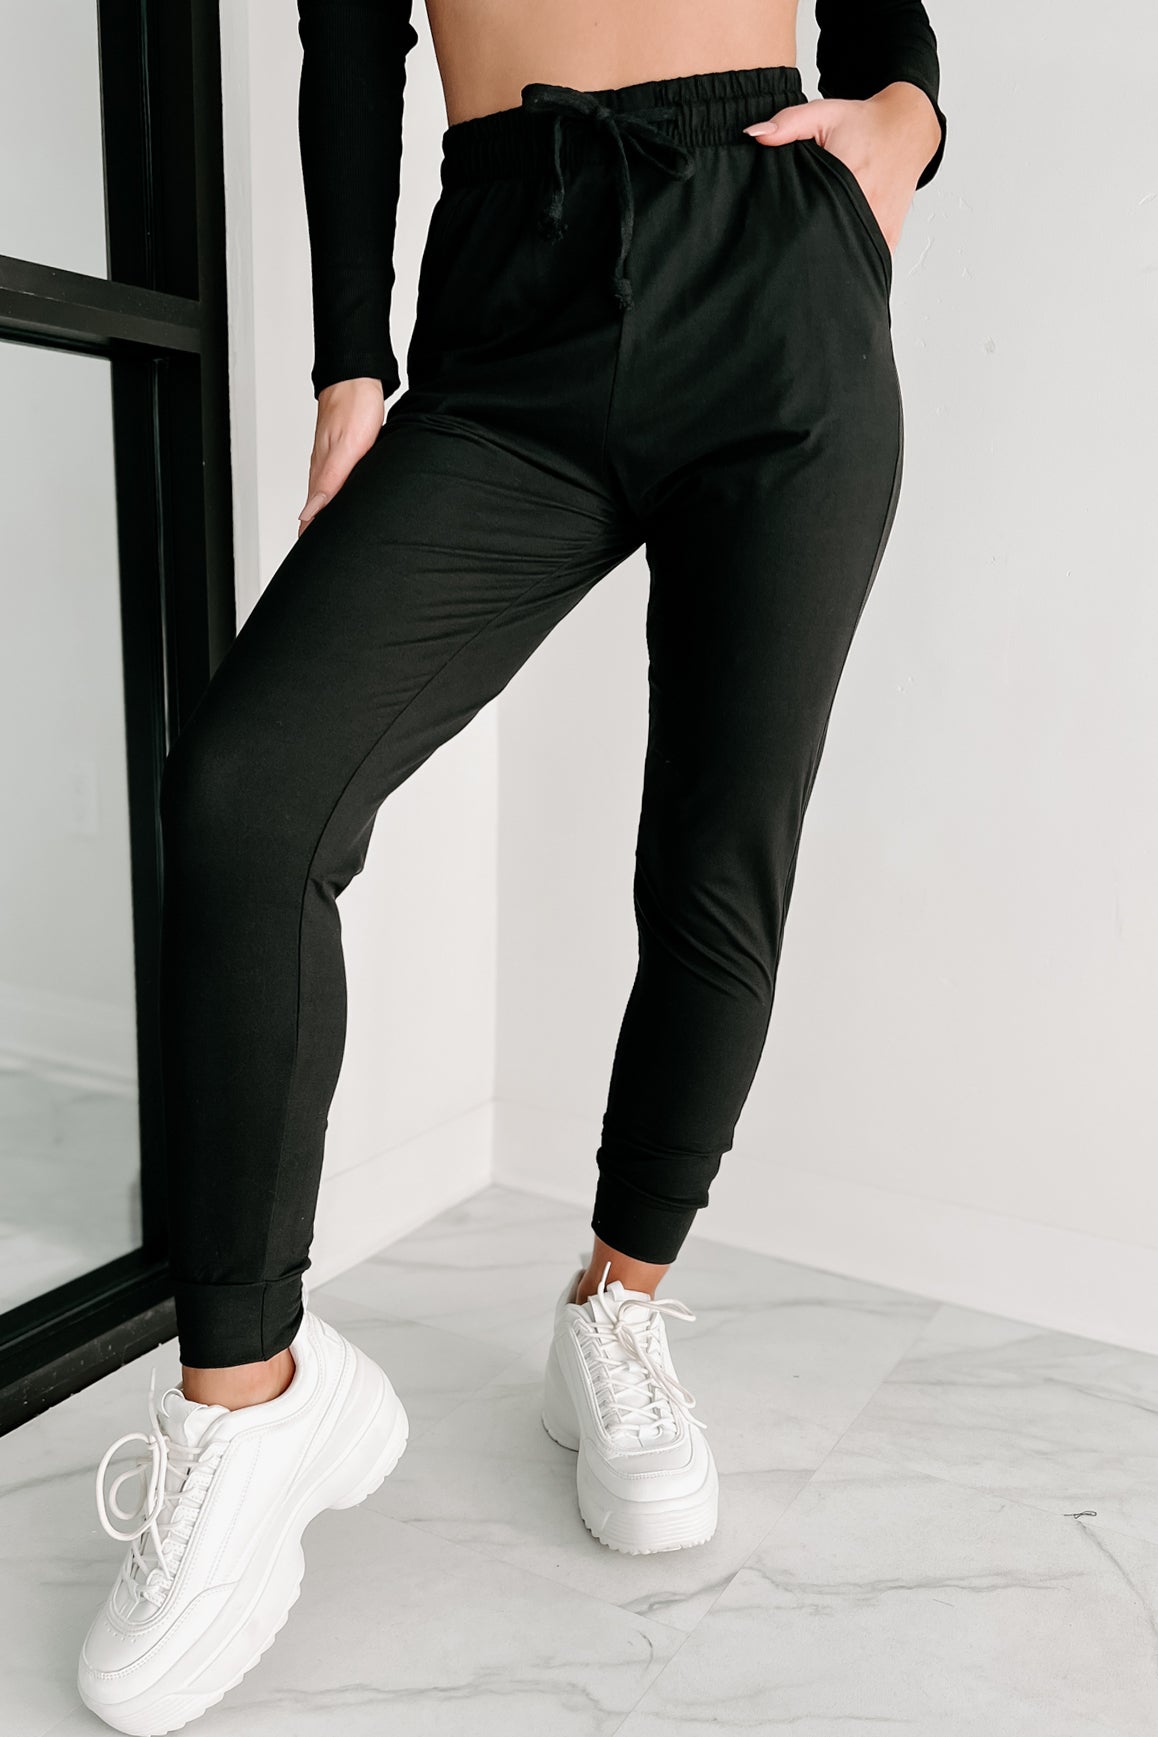 Holiday Steal- Keeping Cozy Buttery Soft Joggers (Black) - NanaMacs